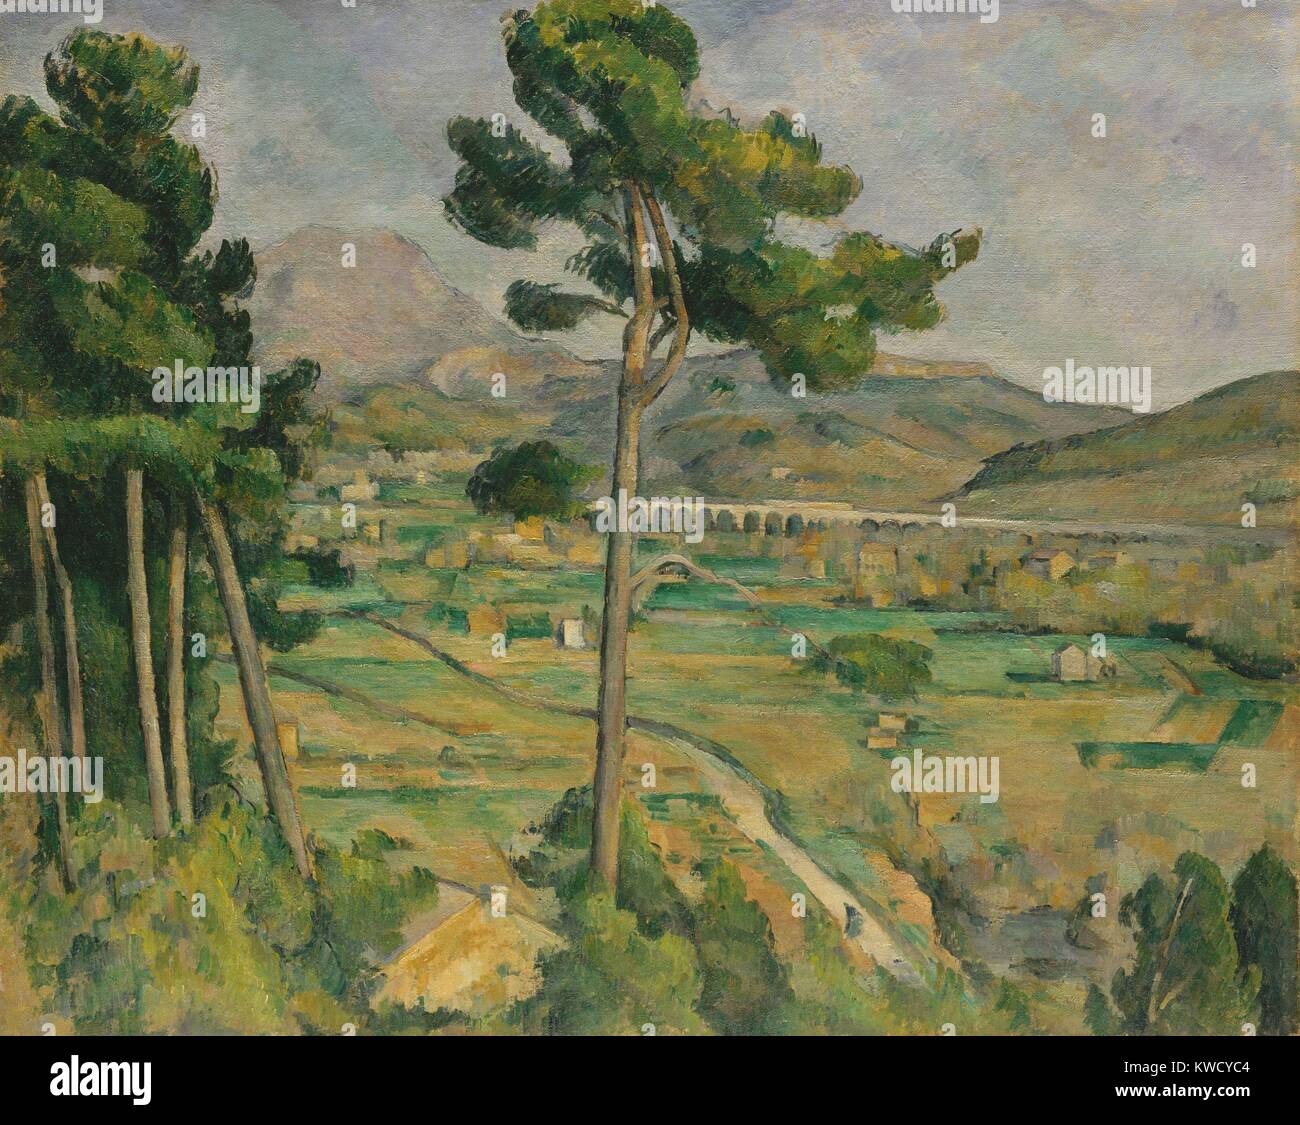 Mont Sainte-Victoire, Viaduct of the Arc River Valley, by Paul Cezanne, 1882-85, Post-Impressionism. Cezannes native city of Aix-en-Provence is in the distance, above the banks of the Arc River Valley (BSLOC 2017 5 5) Stock Photo